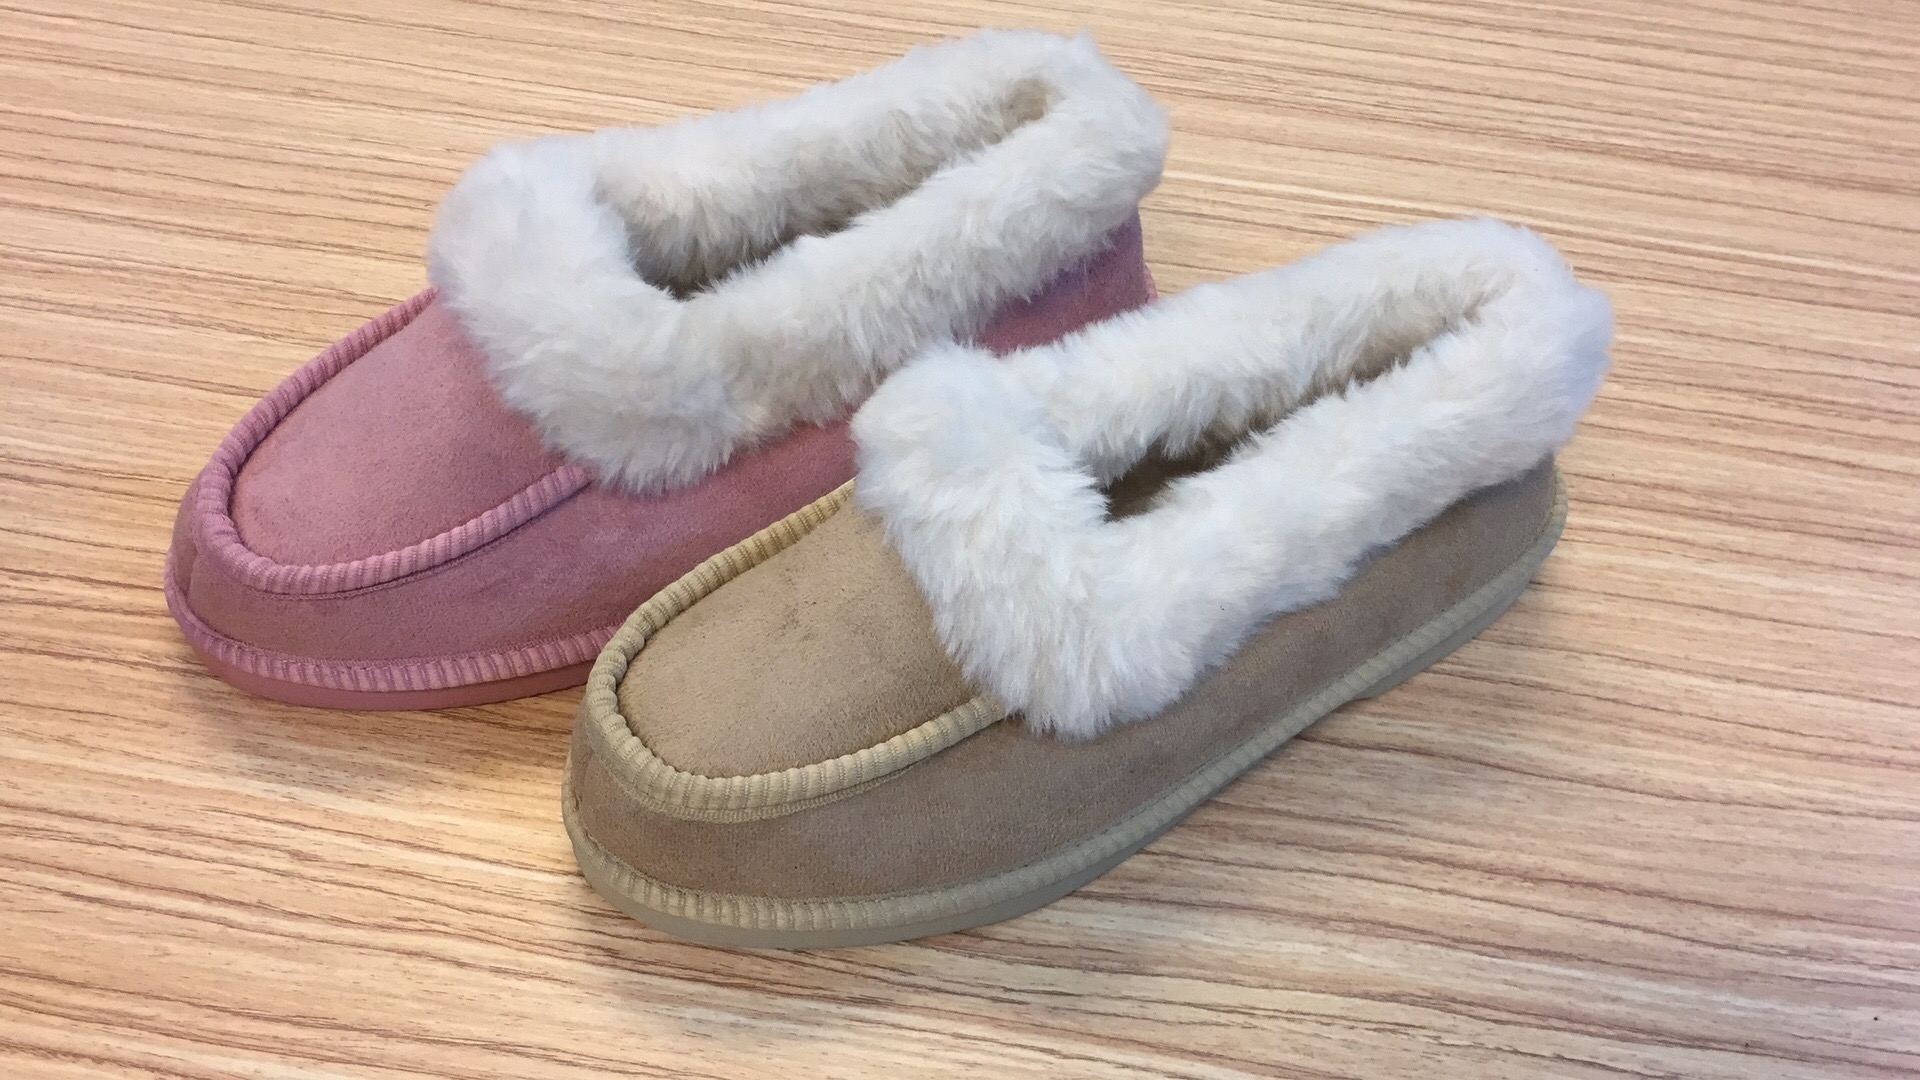 Women's Ladies' Moccasin Slippers Slip On Casual Shoes